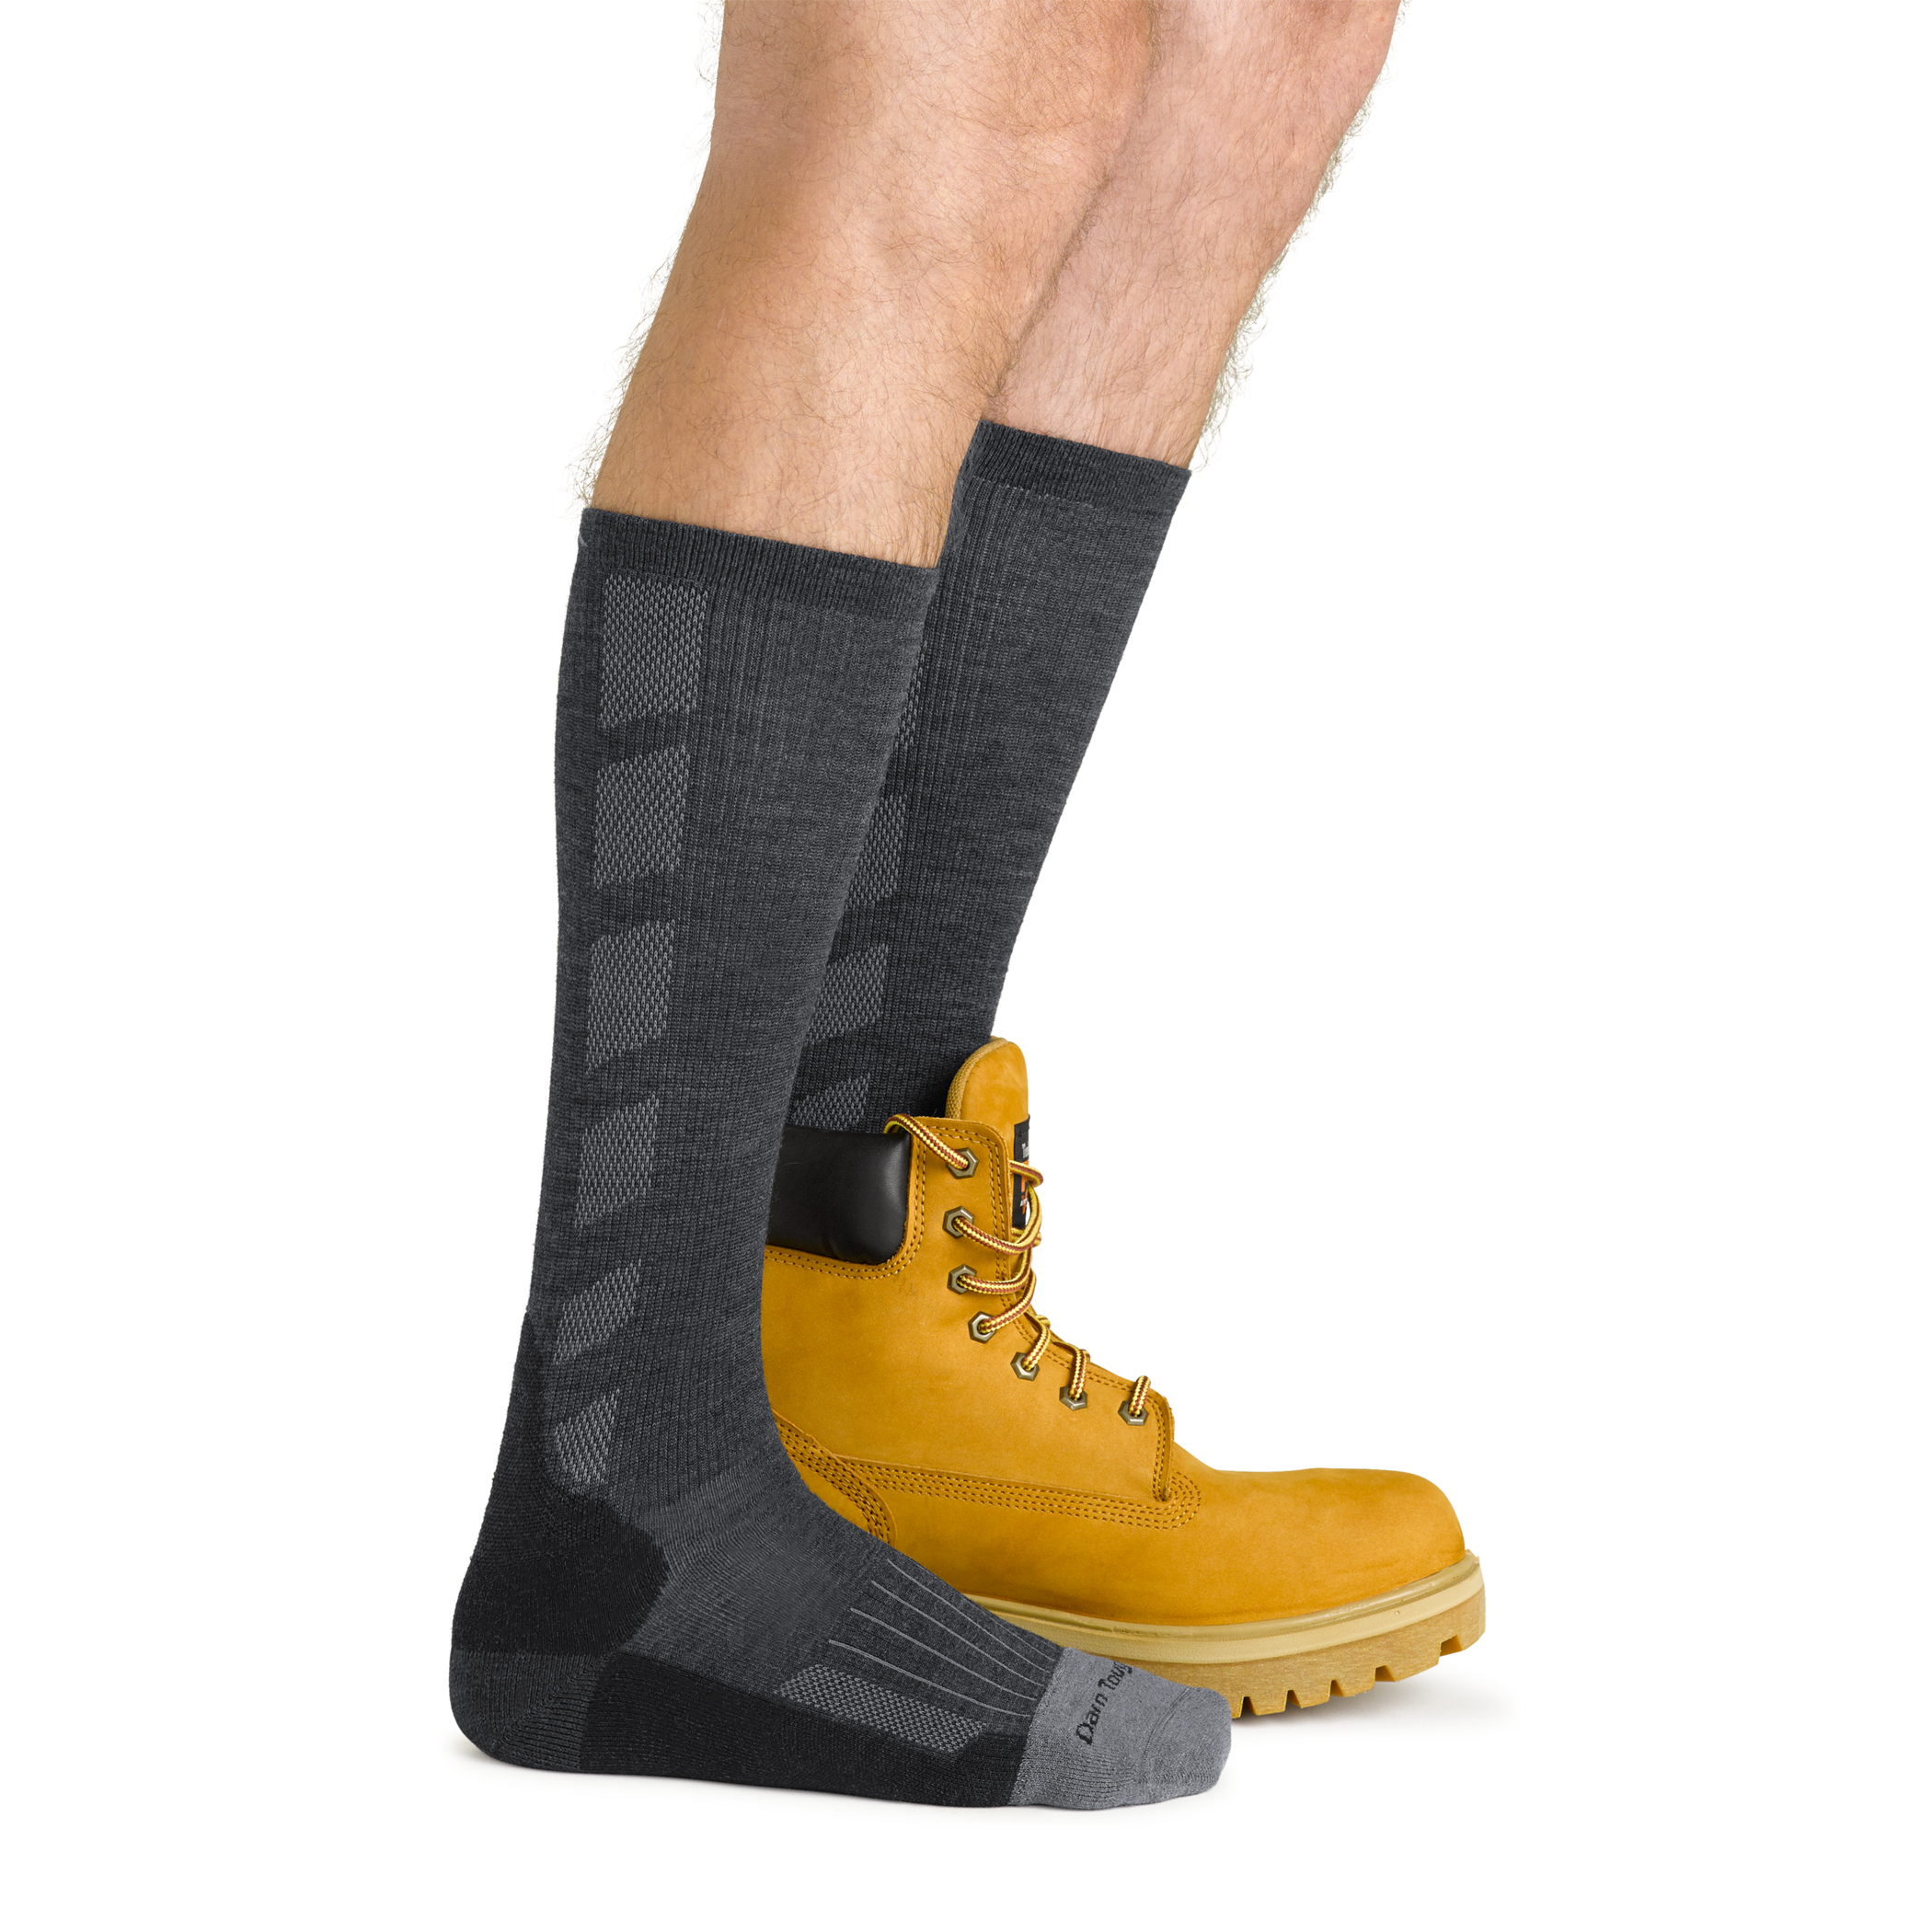 Best Socks for Work Boots – Darn Tough